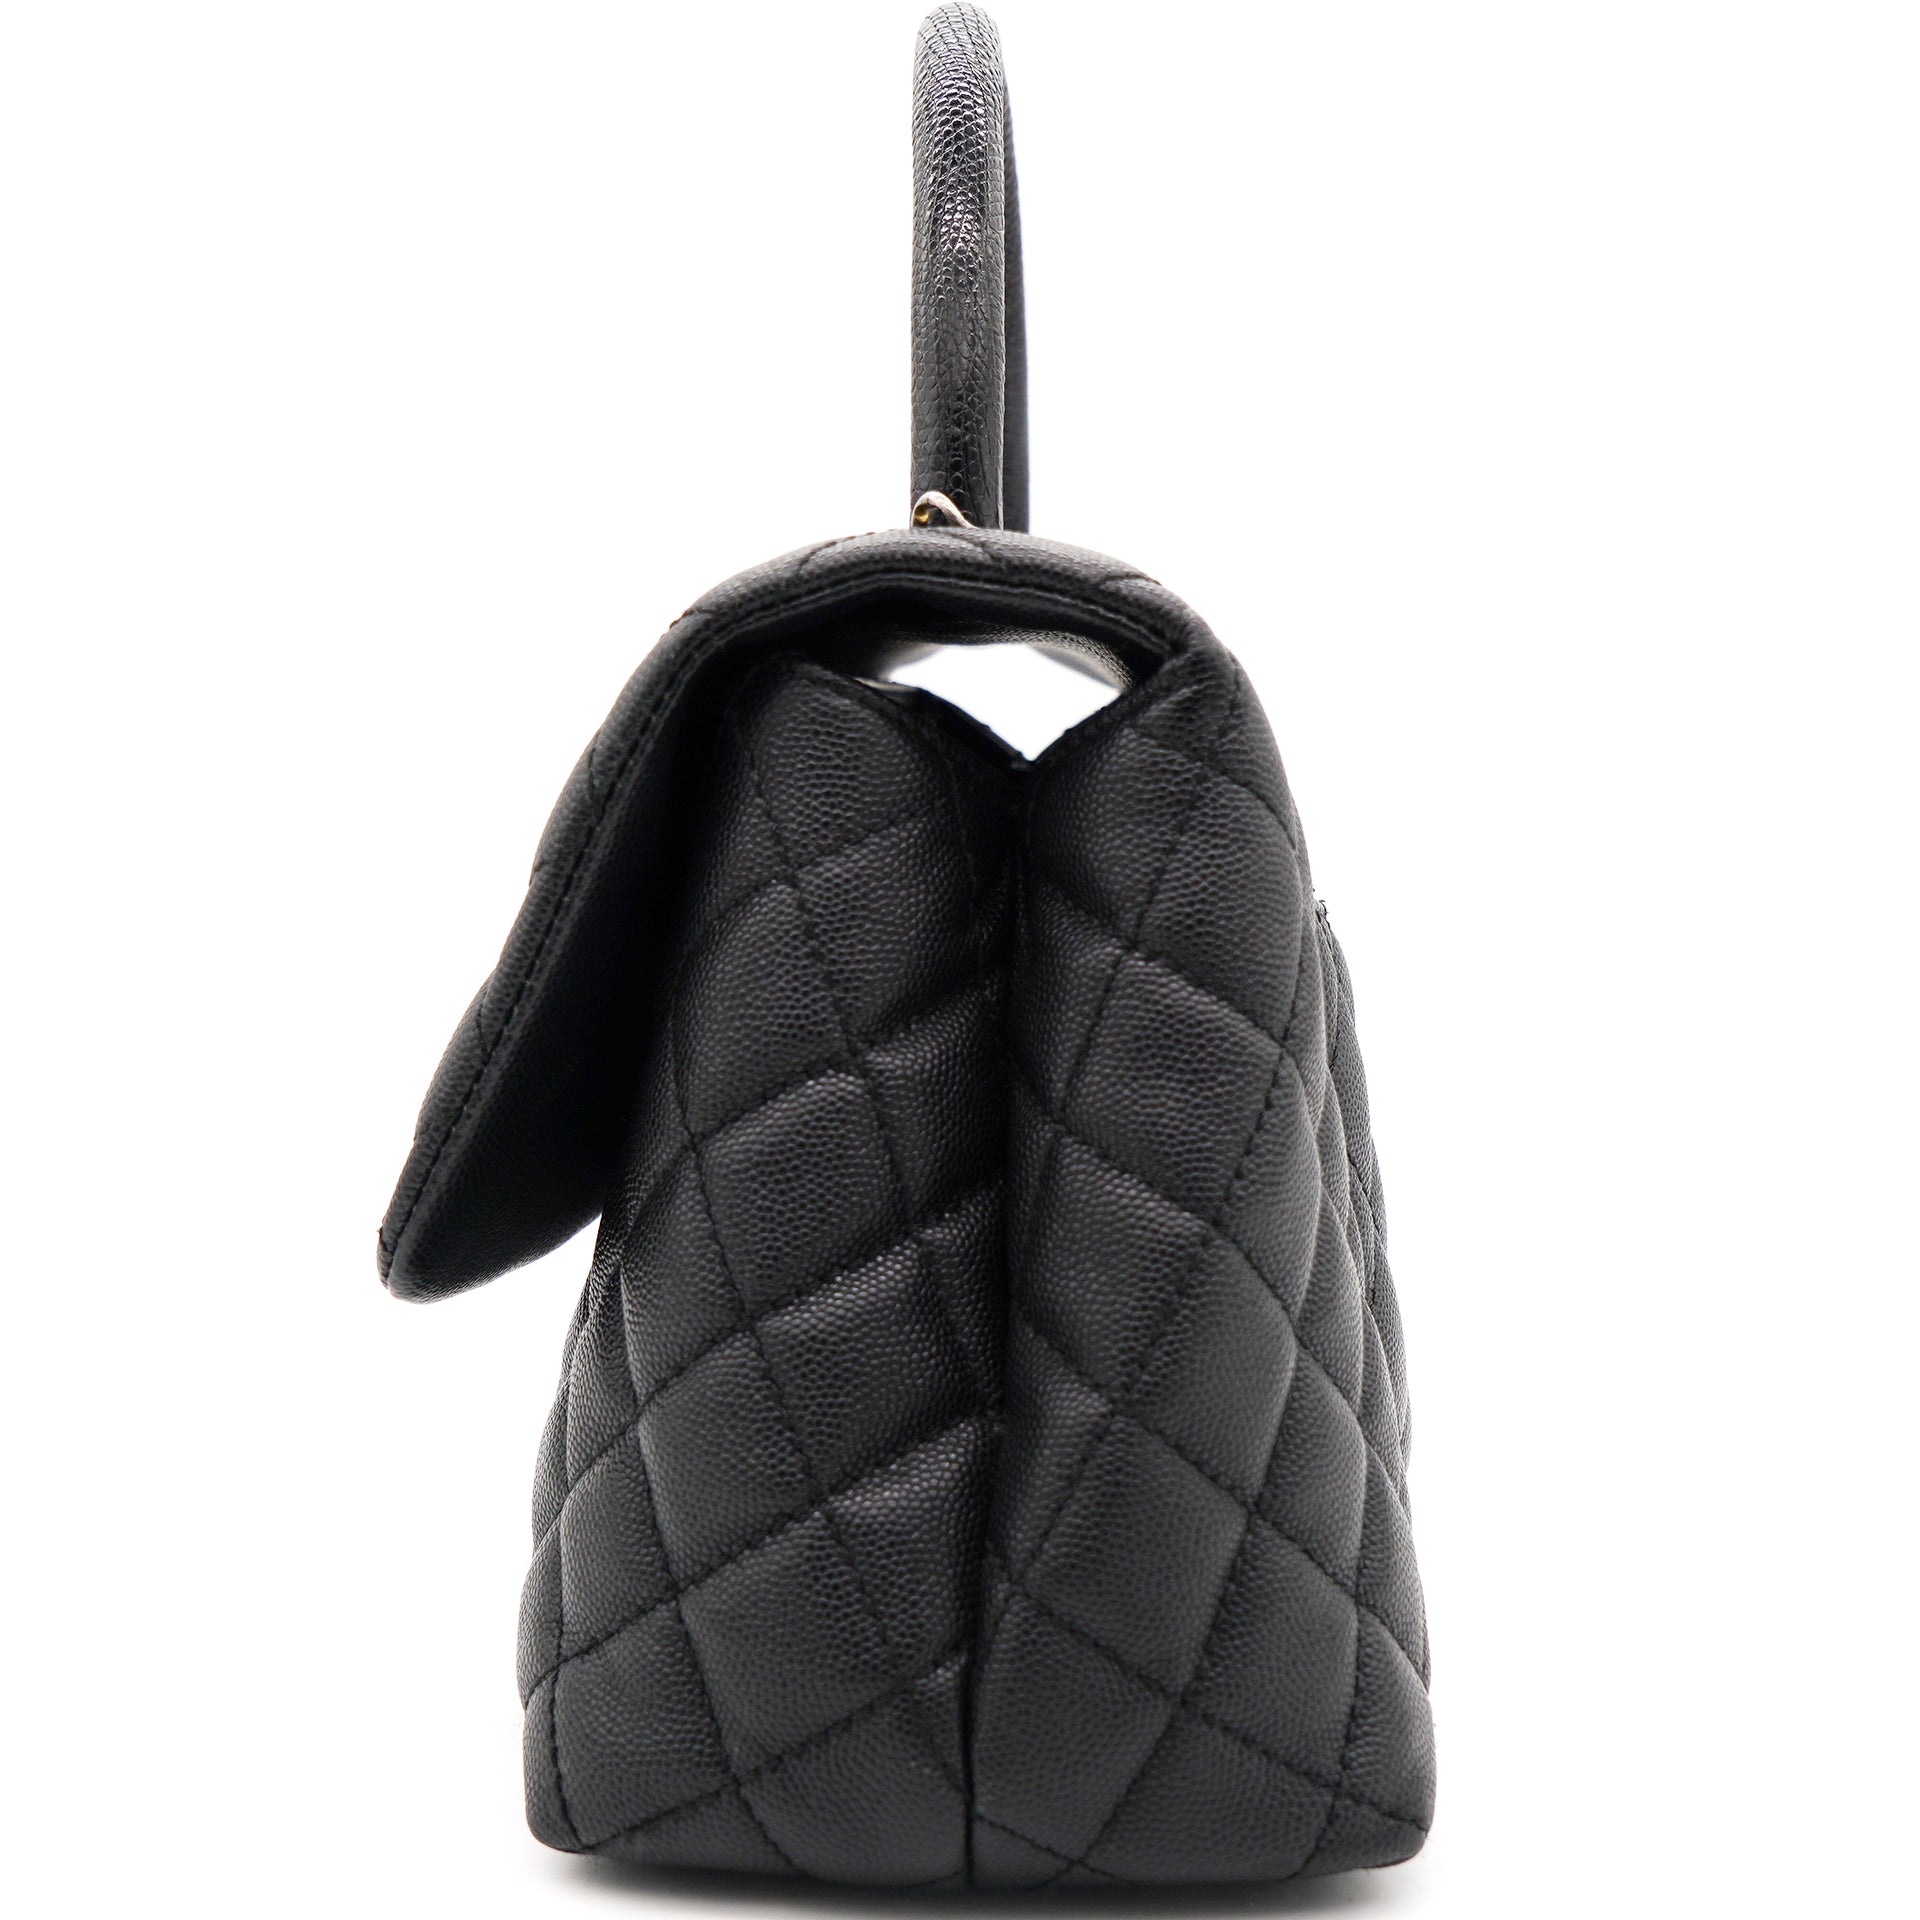 Chanel Black Quilted Caviar Medium Coco Top Handle Flap Bag Chanel